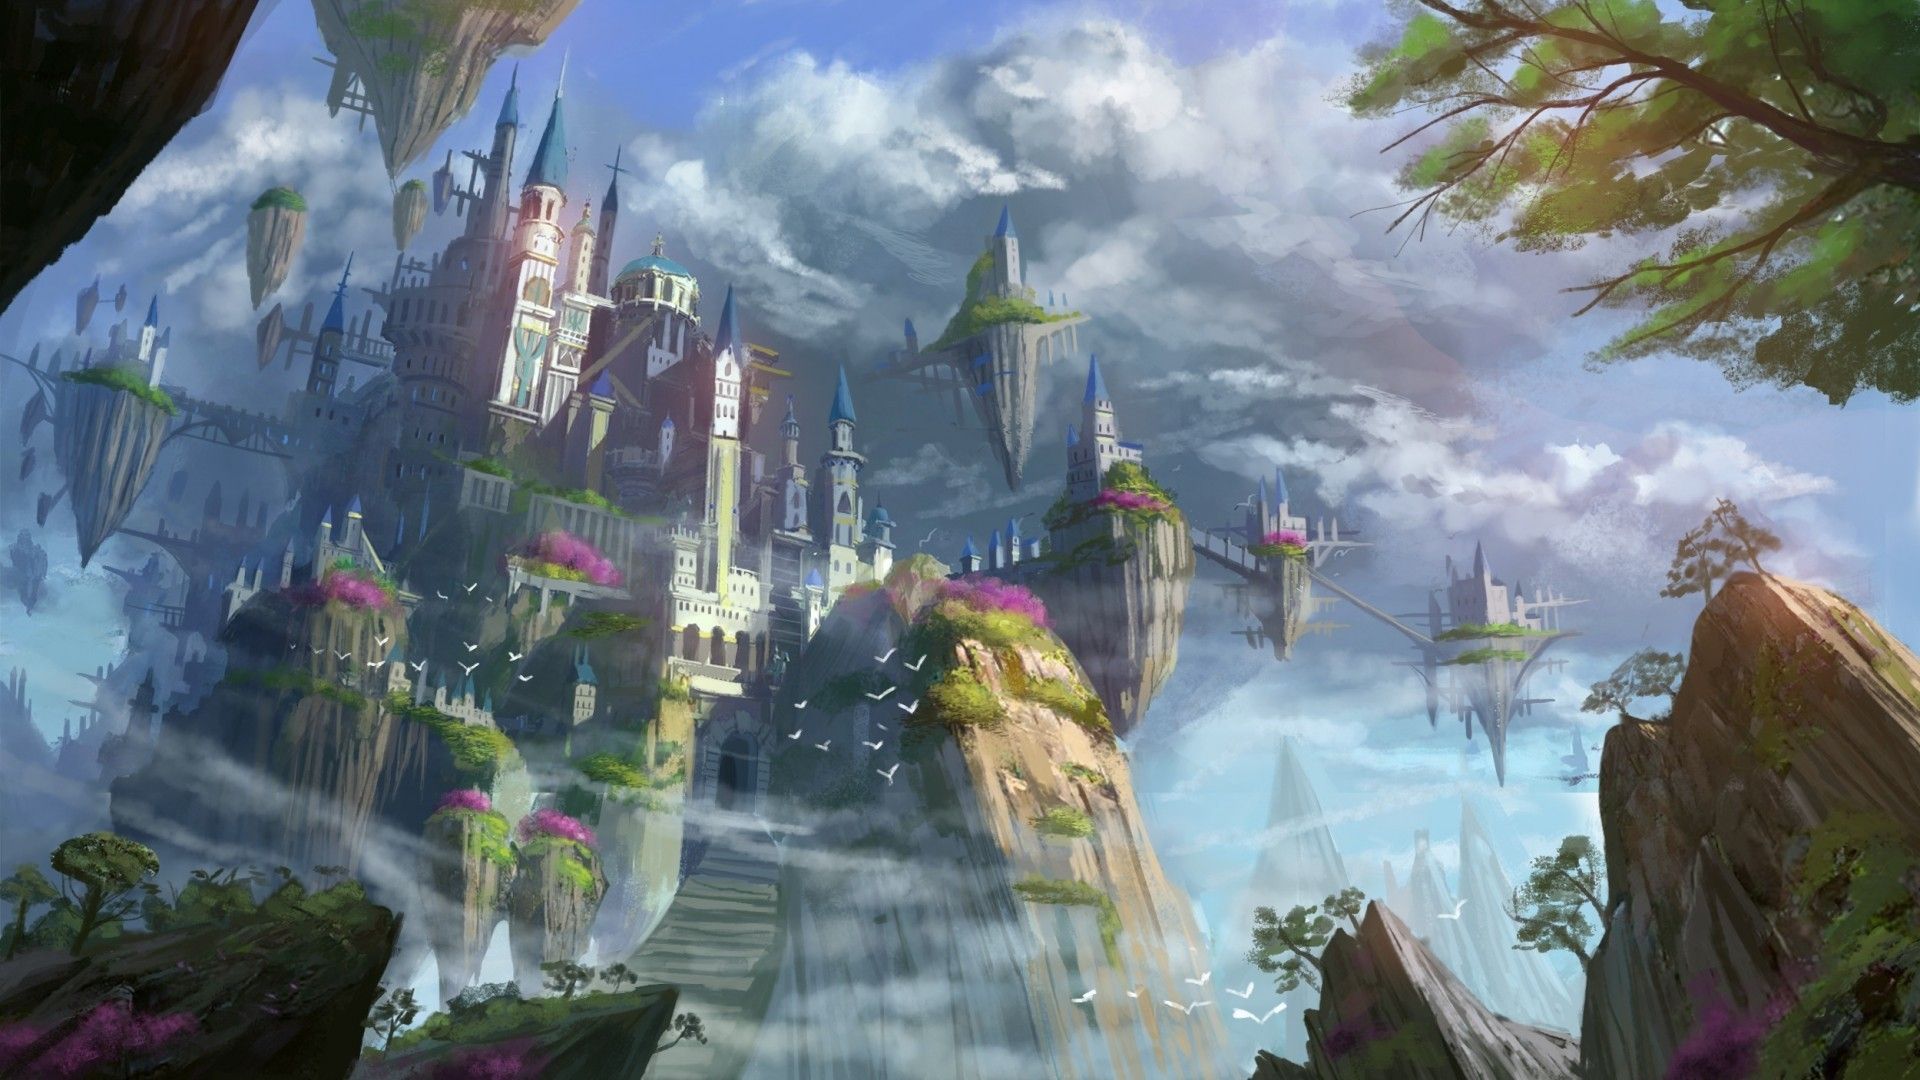 Download 1920x1080 Anime Castle, Airship, Floating Islands, Fantastic World, Scenic Wallpaper for Widescreen